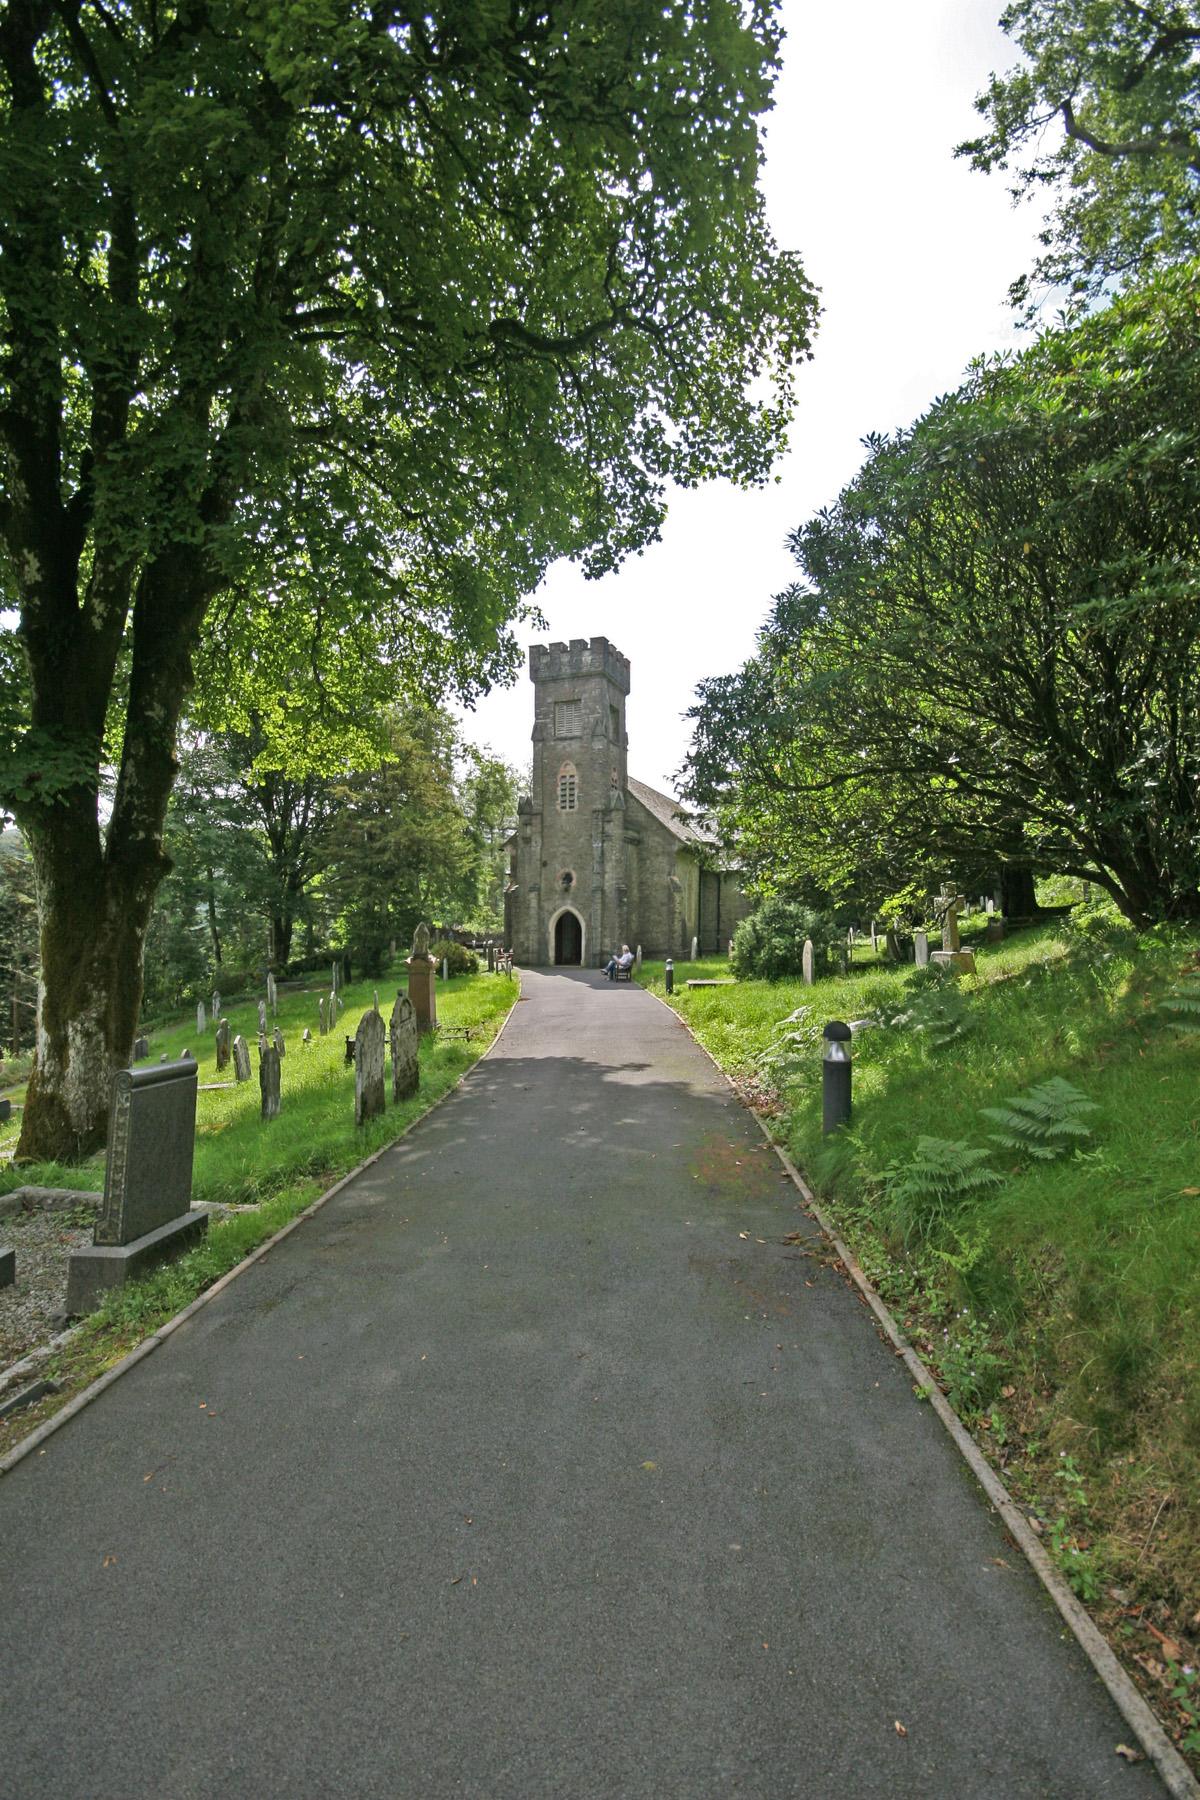 St Michael and All Angels’, Hafod